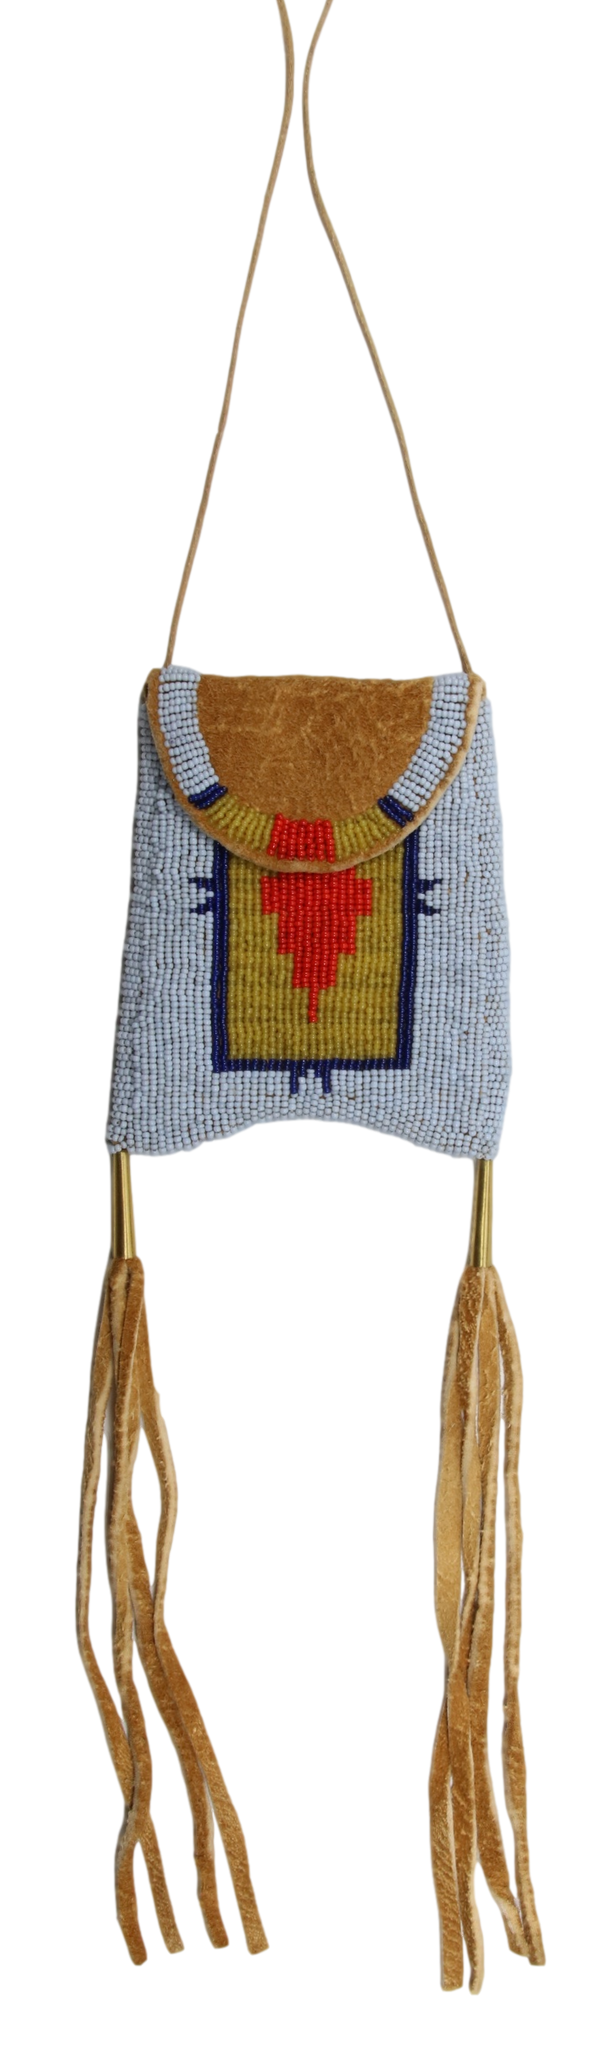 Beaded Plains Indian Medicine Bag or Neck Pouch